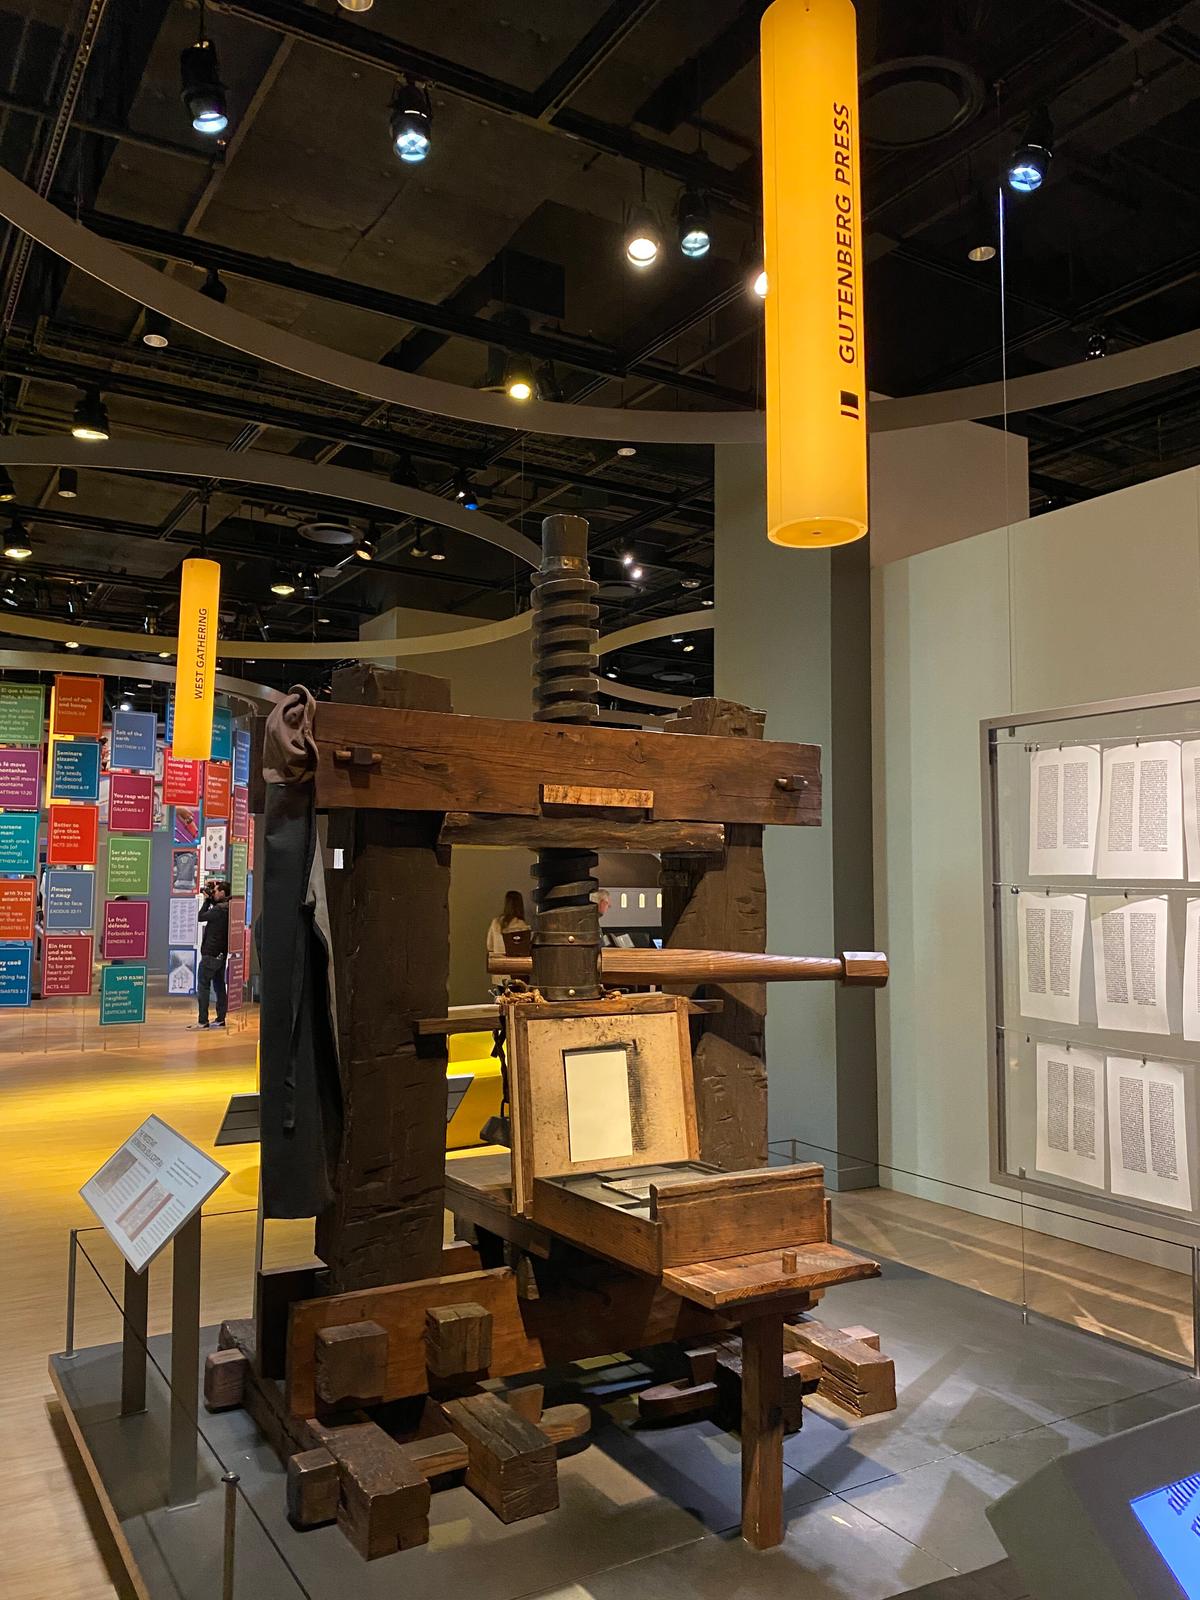 The invention of the Gutenberg press ushered in an era of mass communication, driving up literacy, innovation, and access to books like the Bible, which were previously limited to scholars. (Lynn Topel)